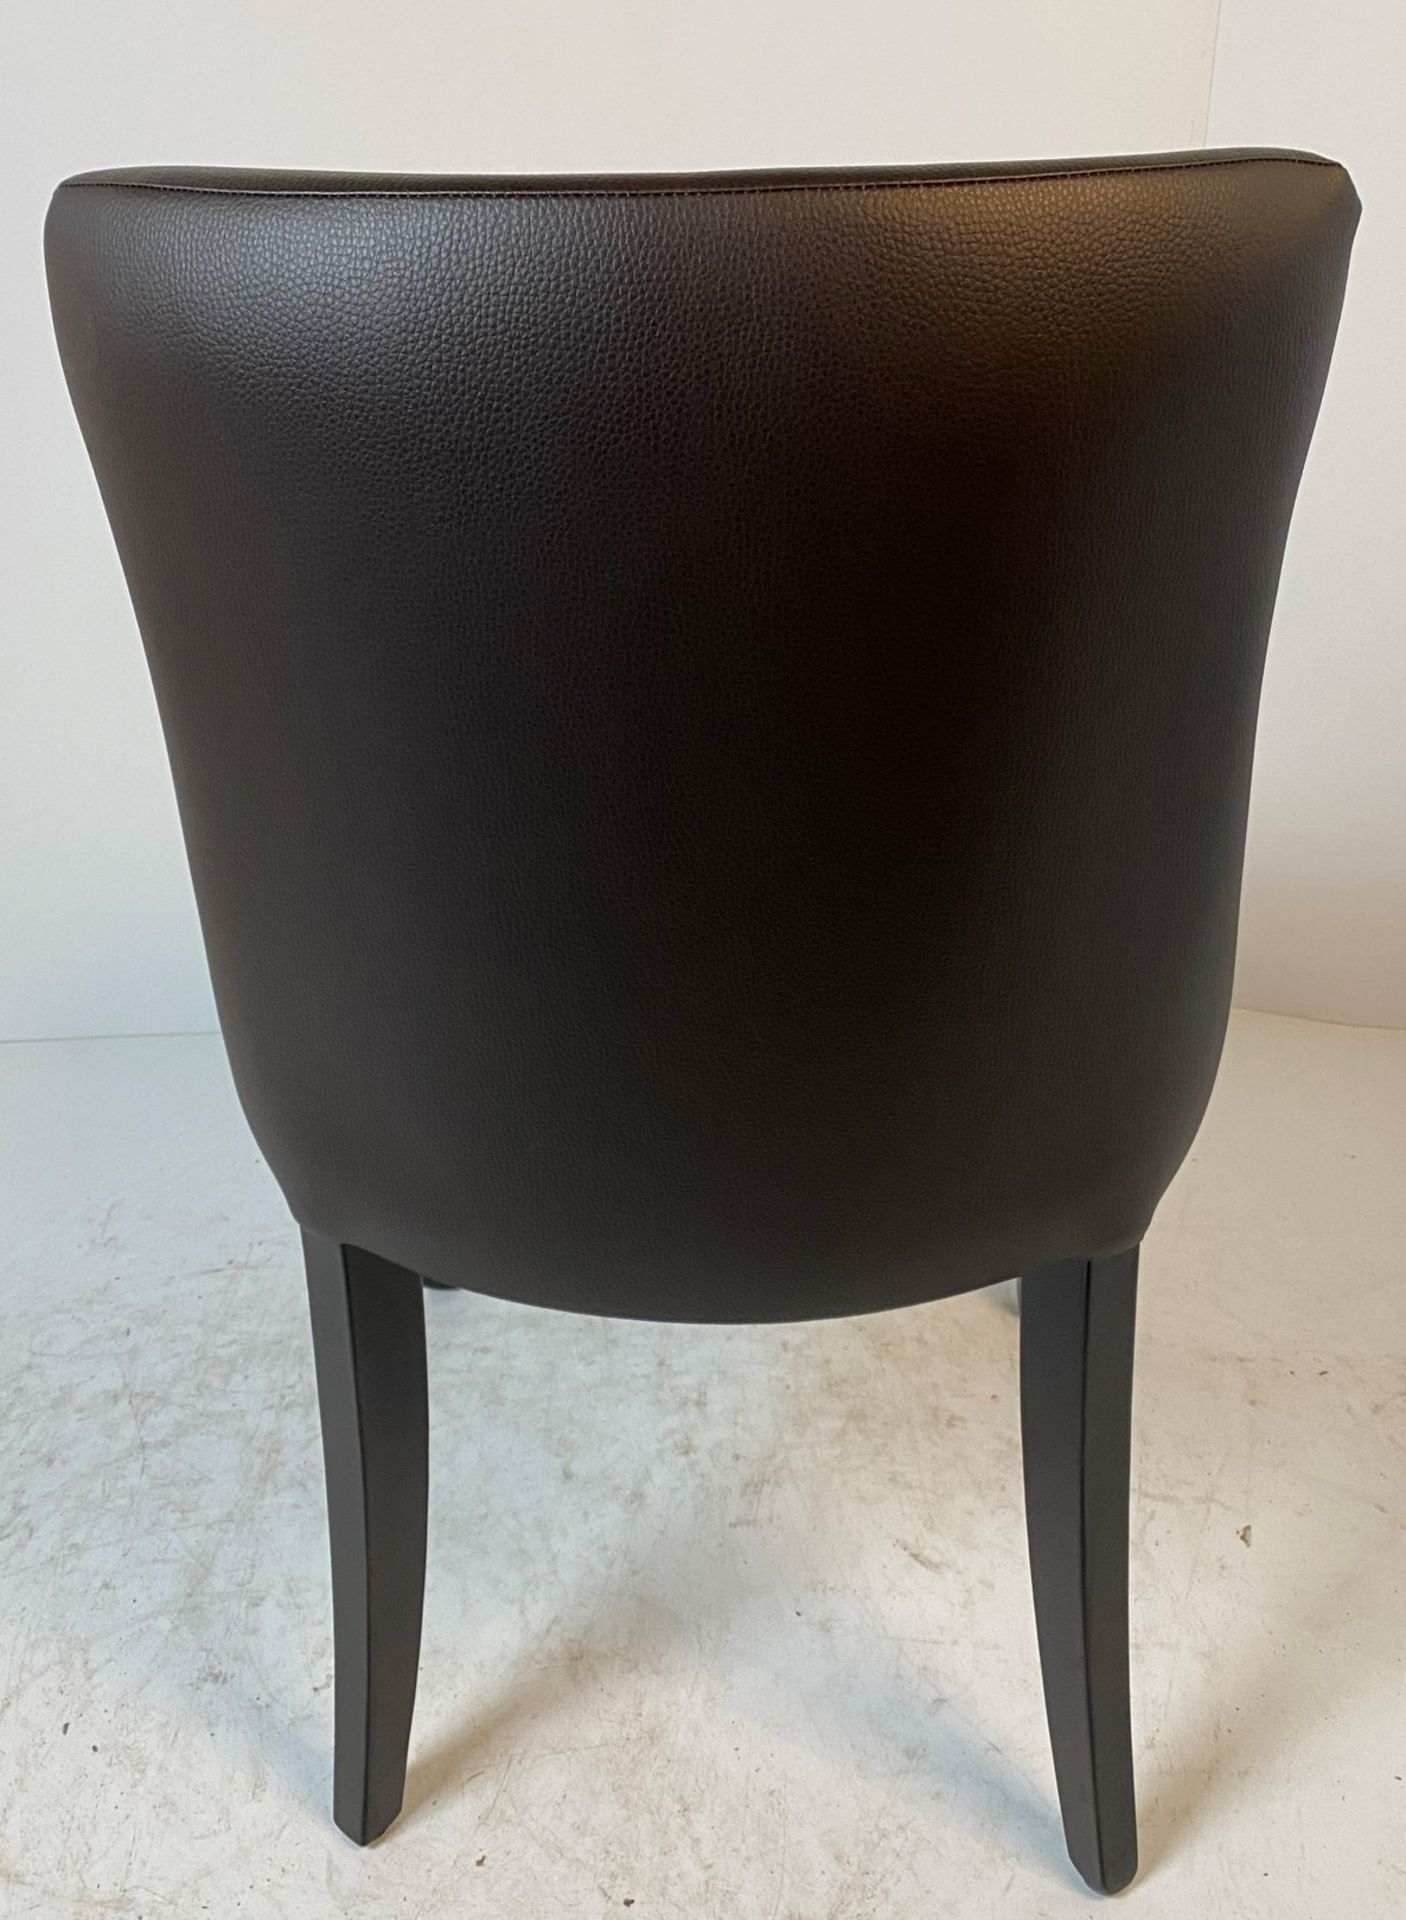 A Leona XL Dollaro A63 side/dining chair with Wenge coloured frame - Image 3 of 4